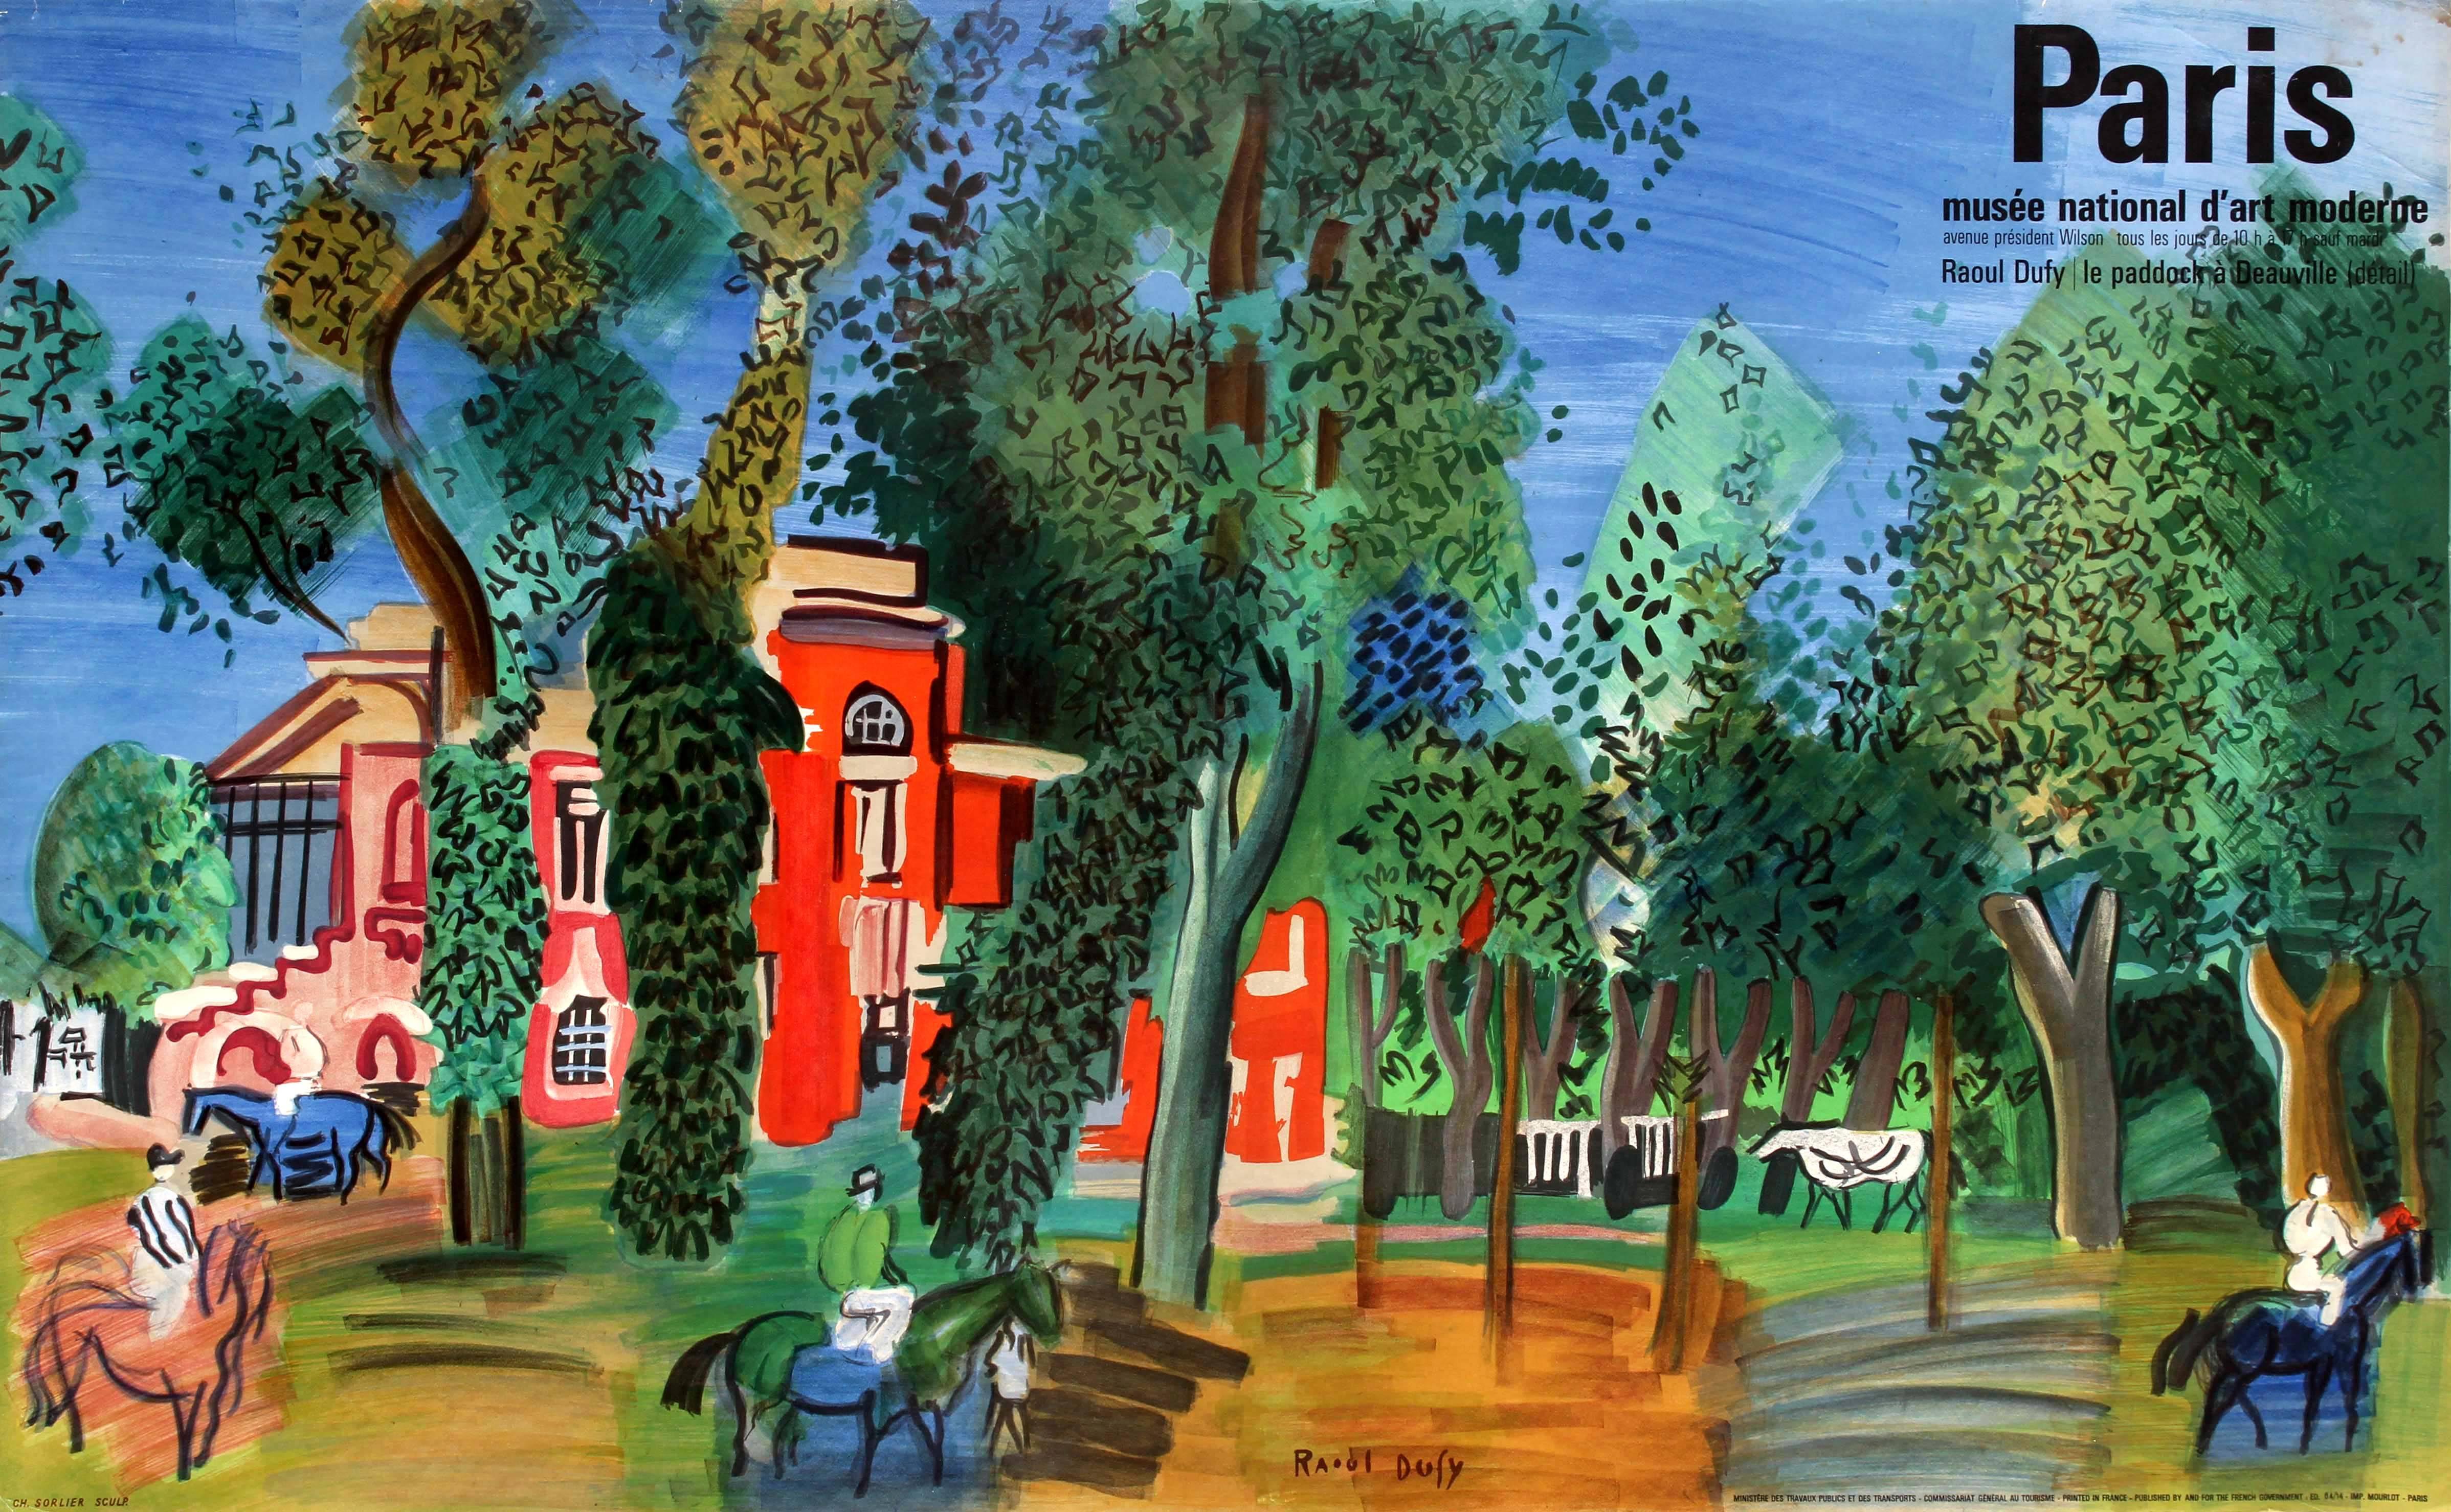 (after) Raoul Dufy Print - Vintage Paris Museum of Modern Art Poster - The Paddock At Deauville